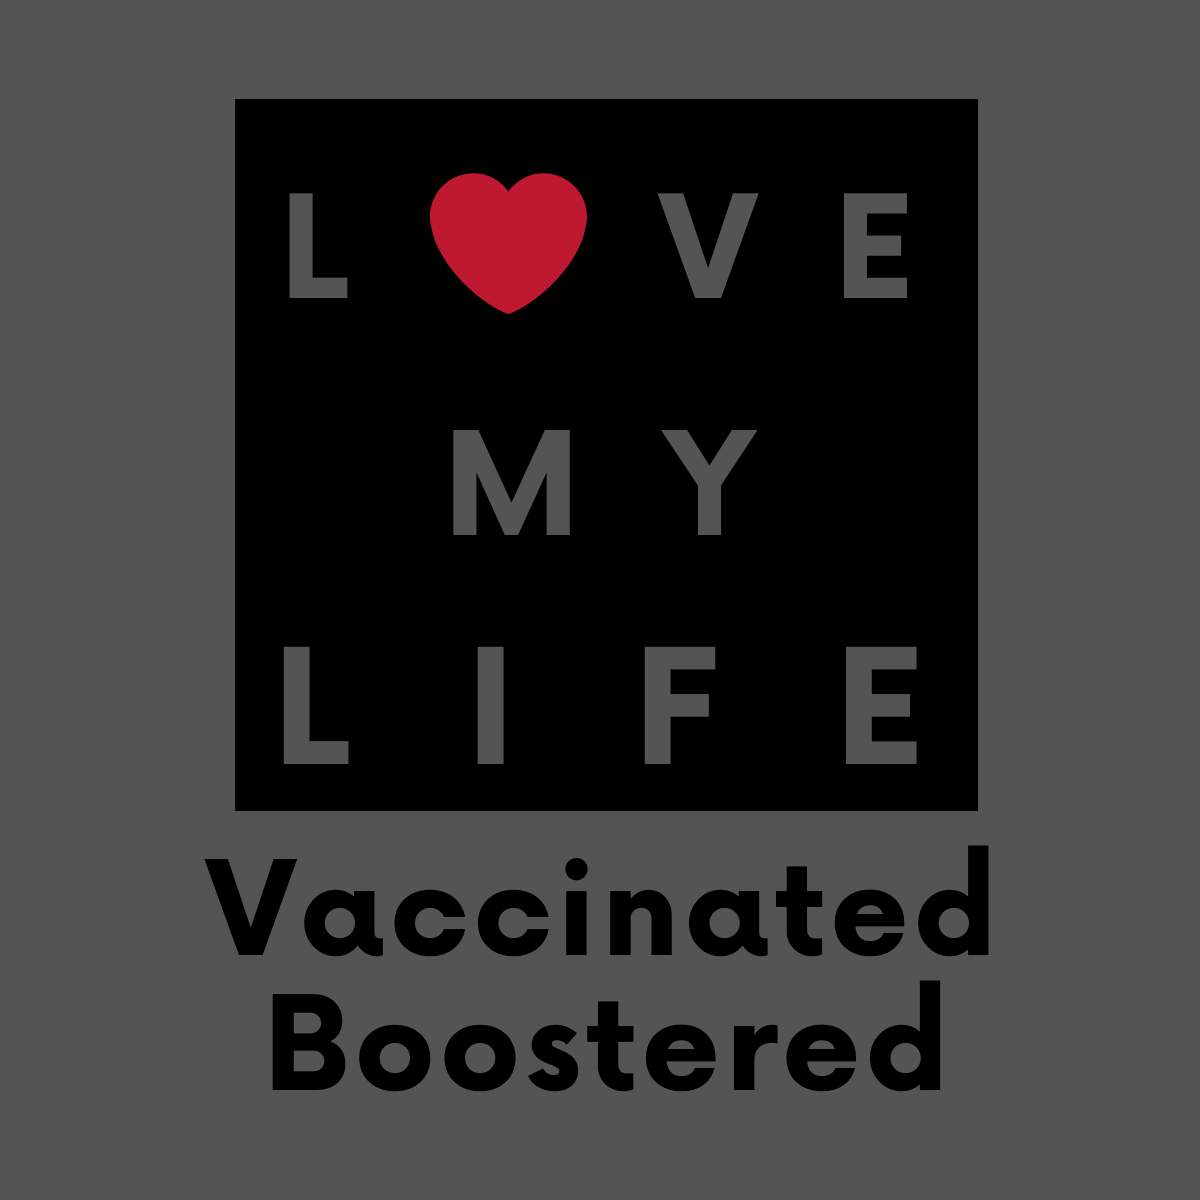 Love My Life Vaccinated Boostered Square Button/Pin